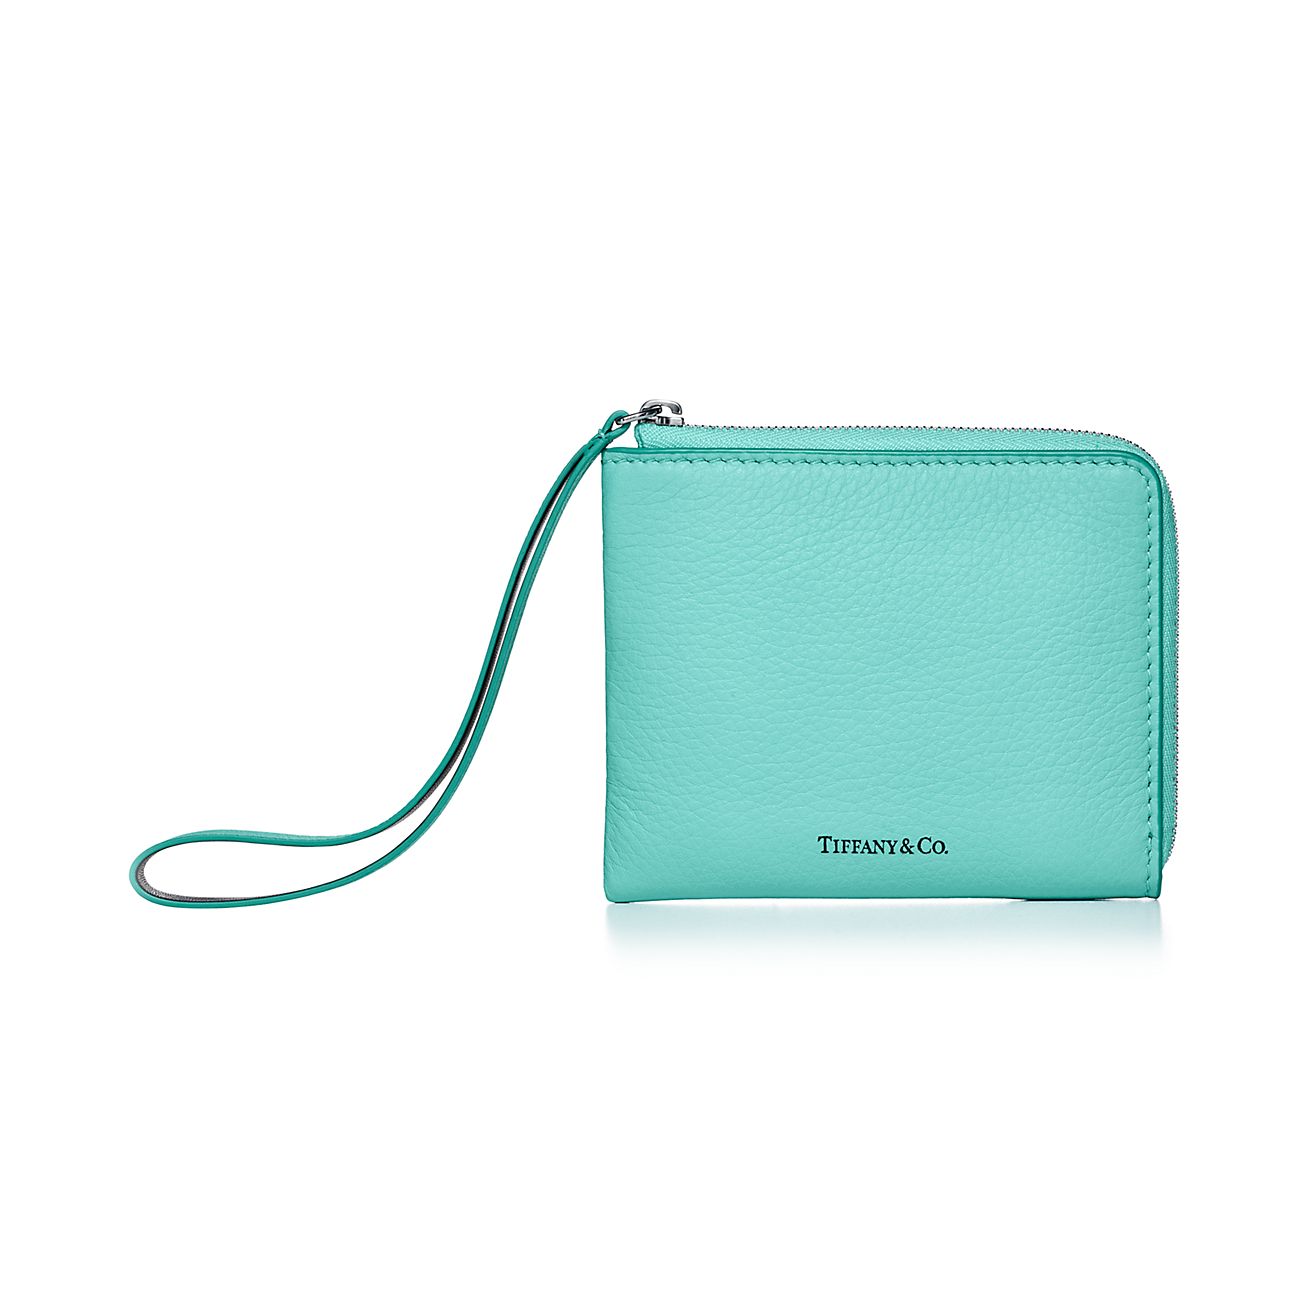 tiffany and co coin purse